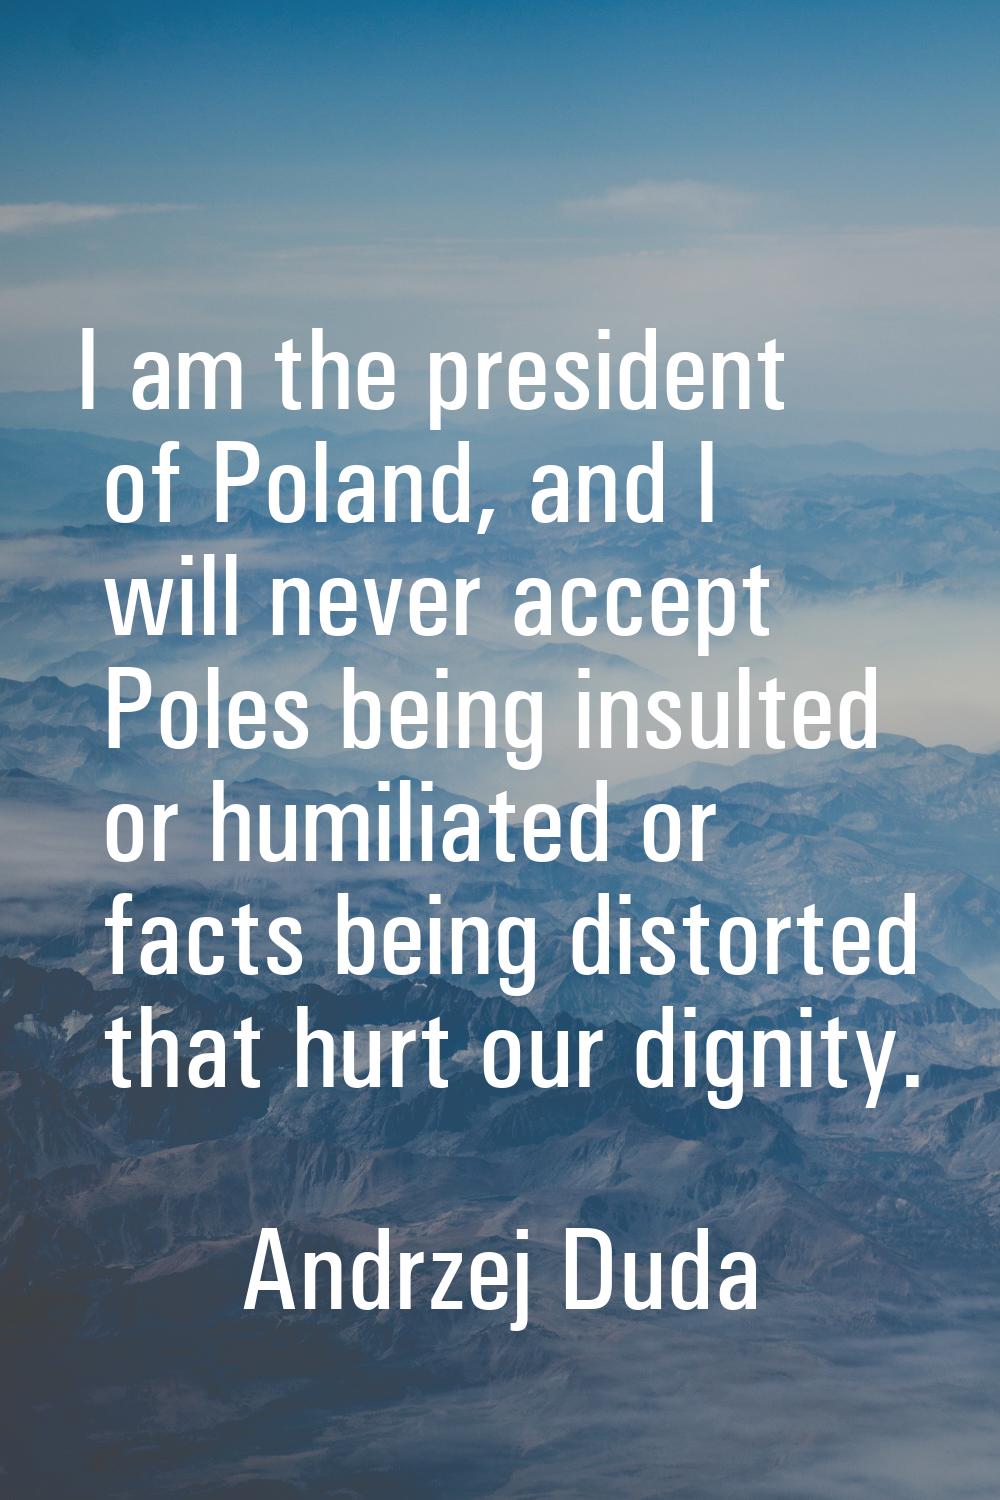 I am the president of Poland, and I will never accept Poles being insulted or humiliated or facts b